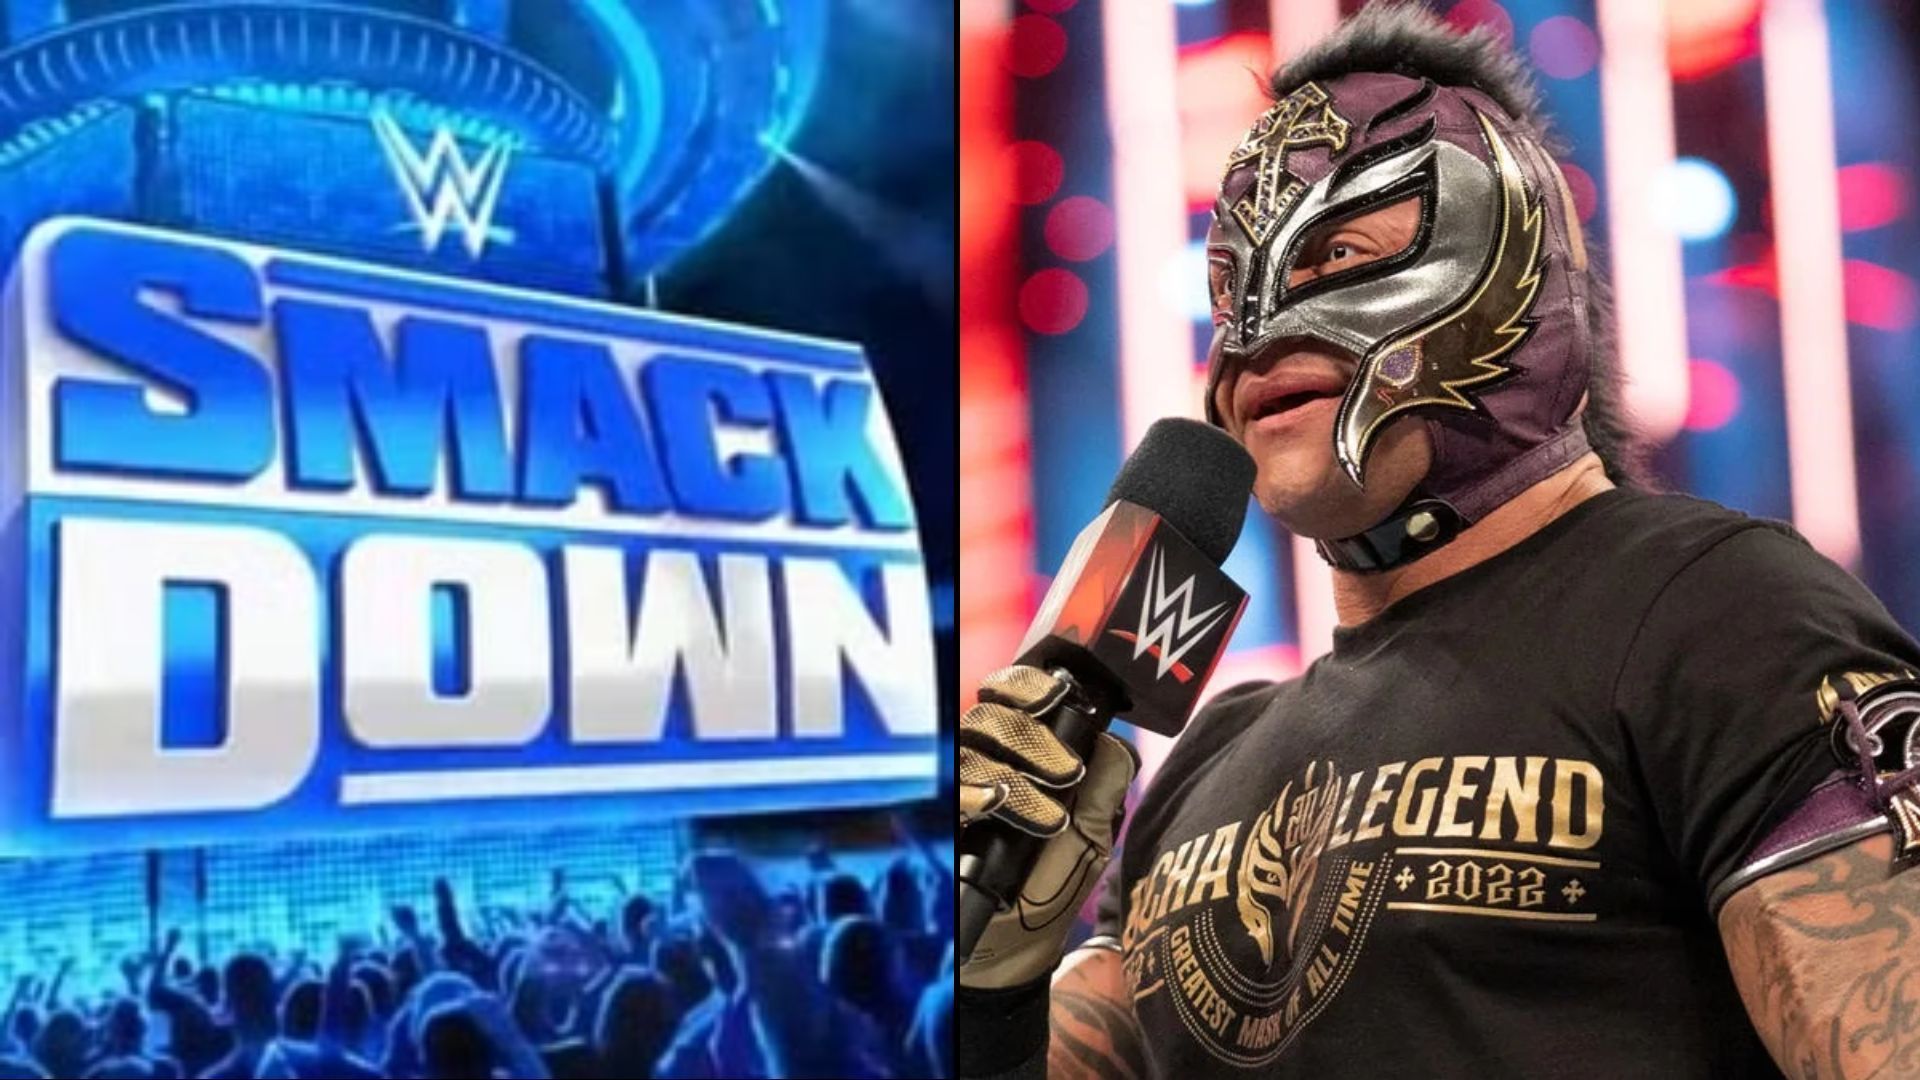 Former SmackDown star John Morrison defeated Rey Mysterio to begin his third Intercontinental Championship run in WWE